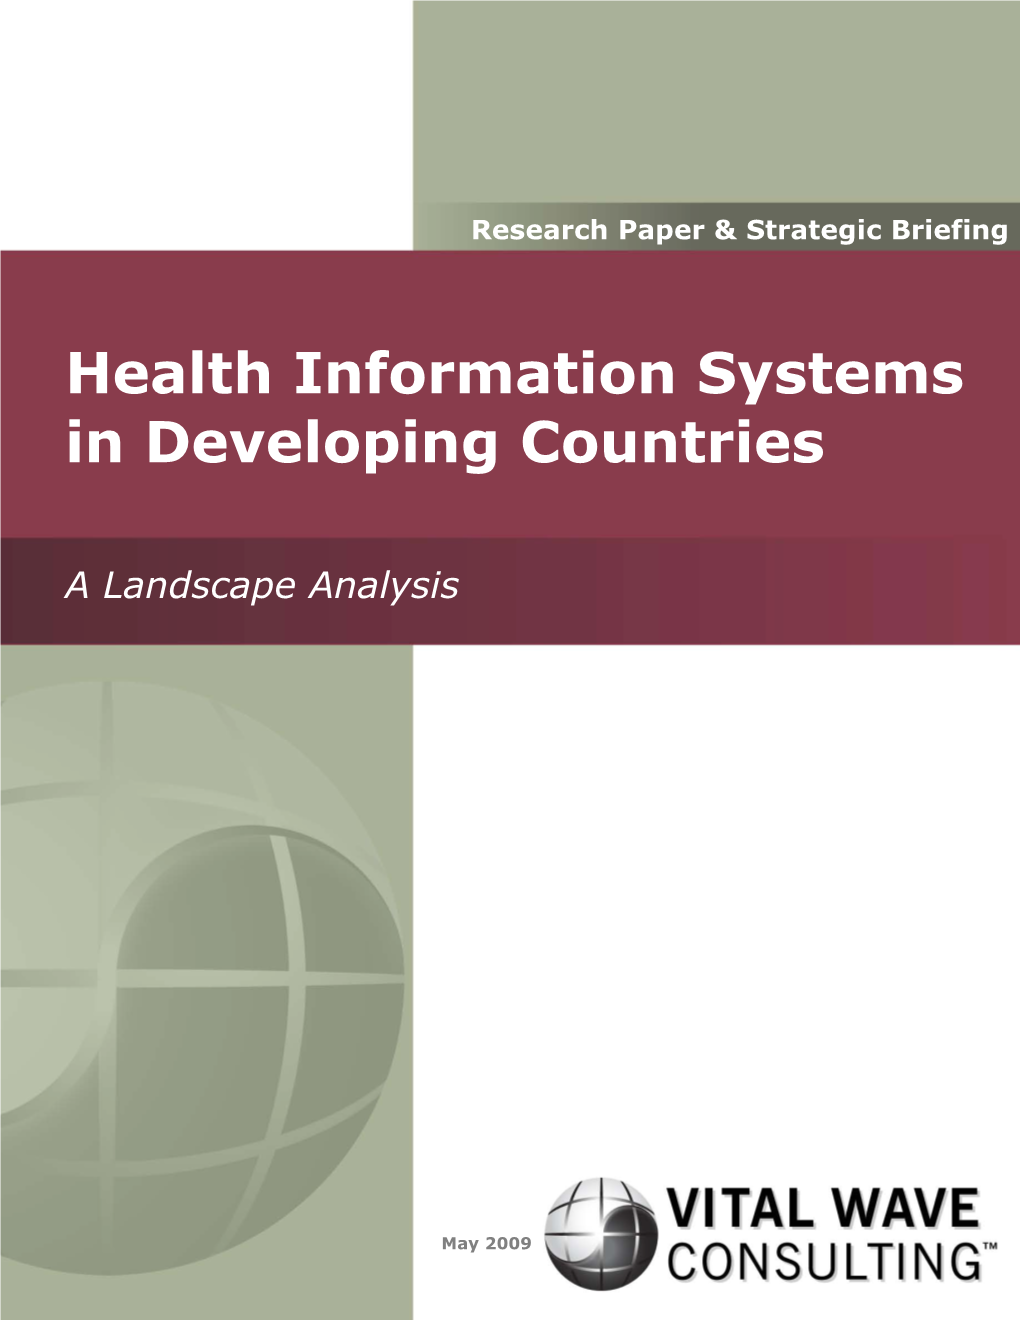 Health Information Systems in Developing Countries